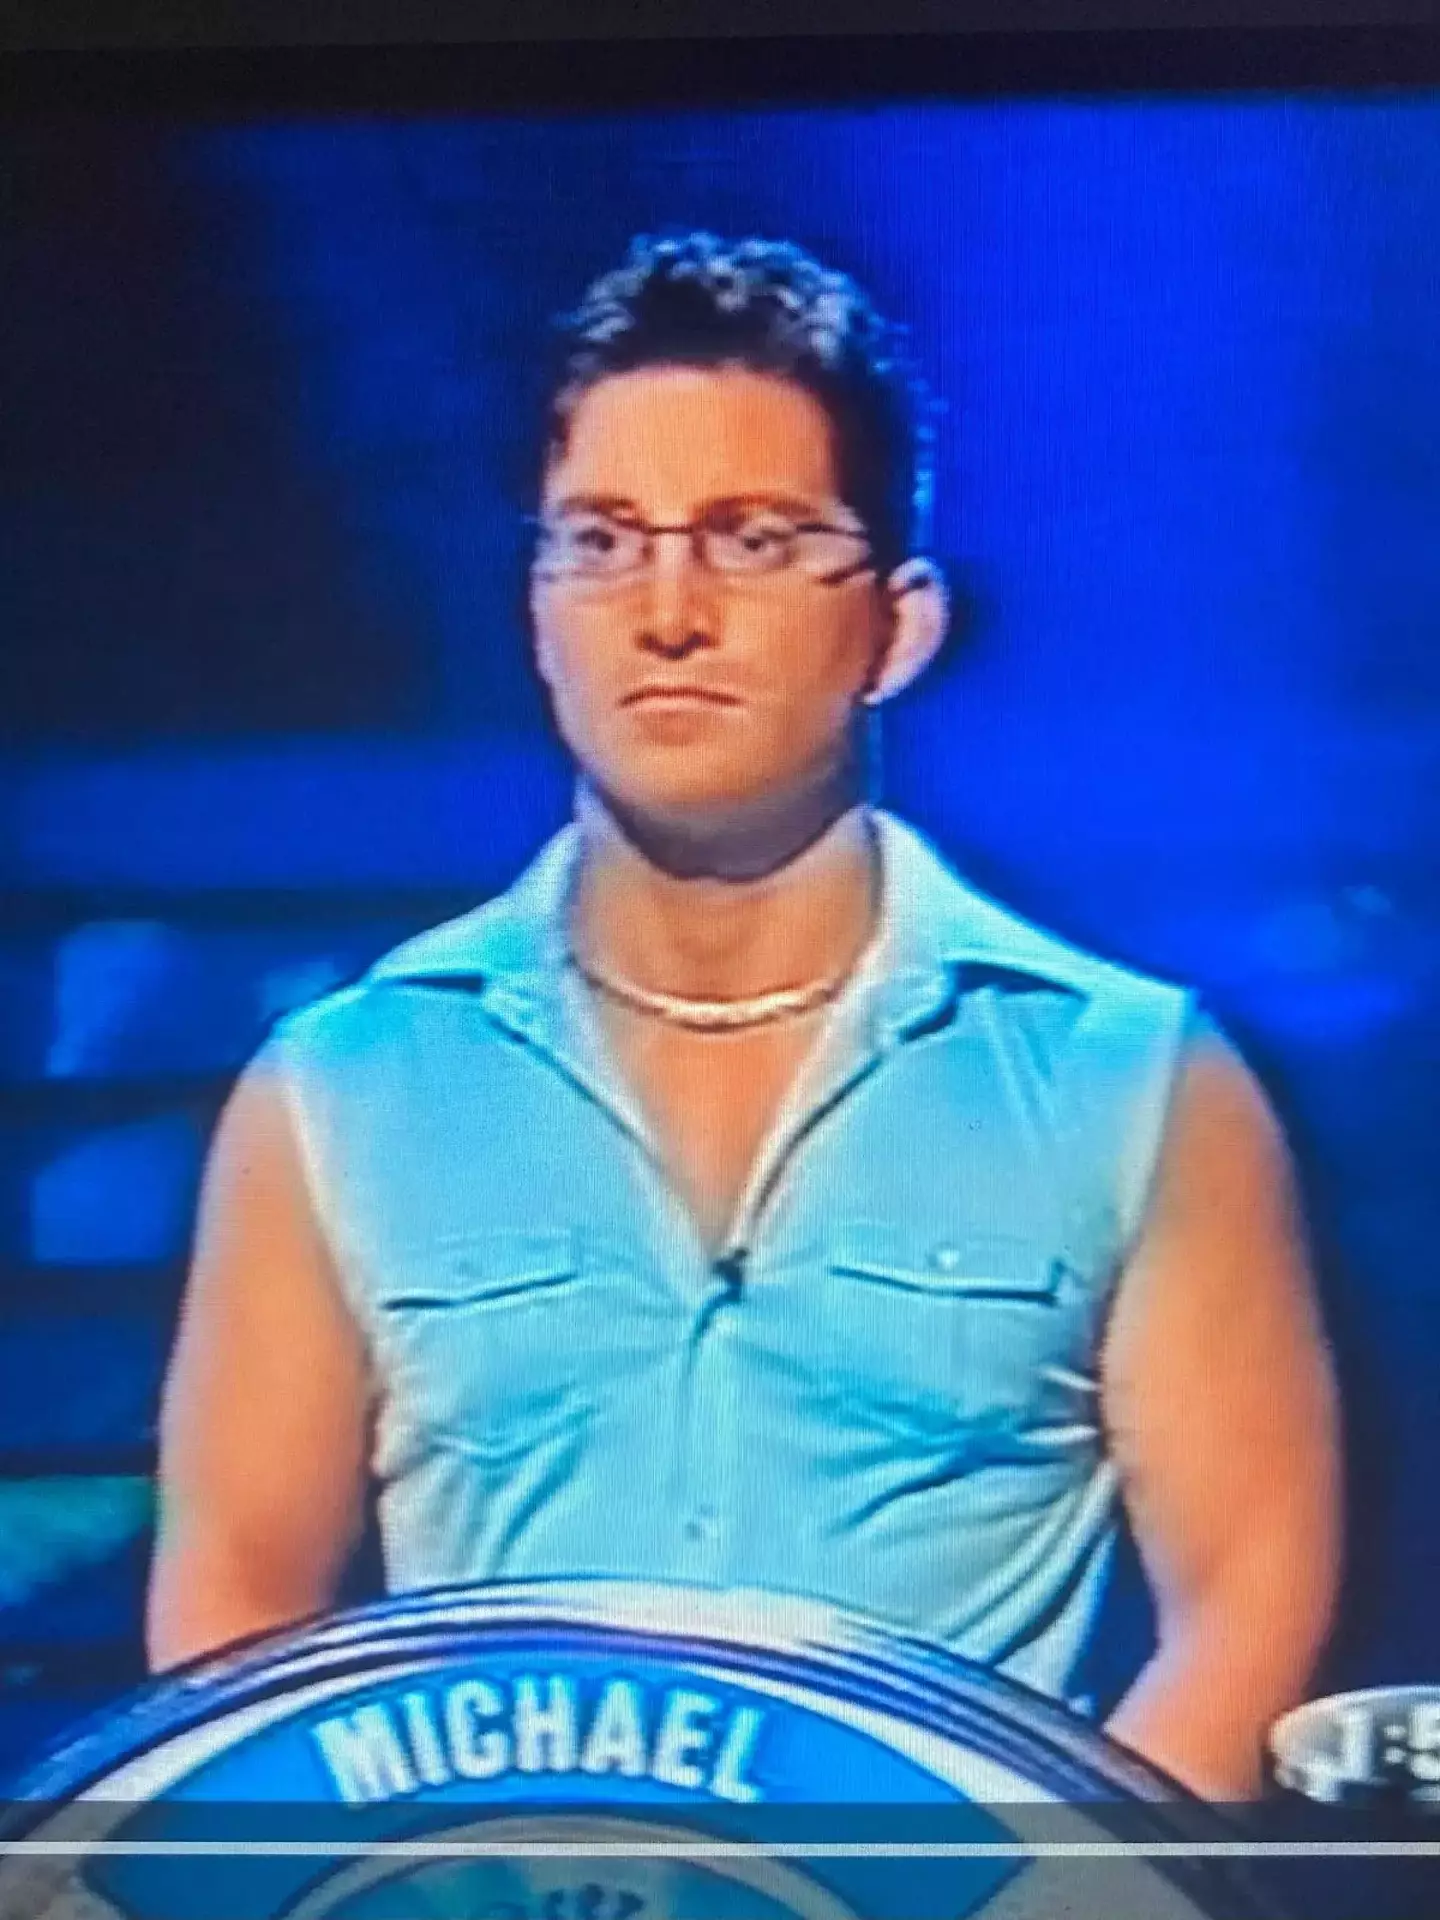 Mike Stratton has made a killing from his appearances on game shows.